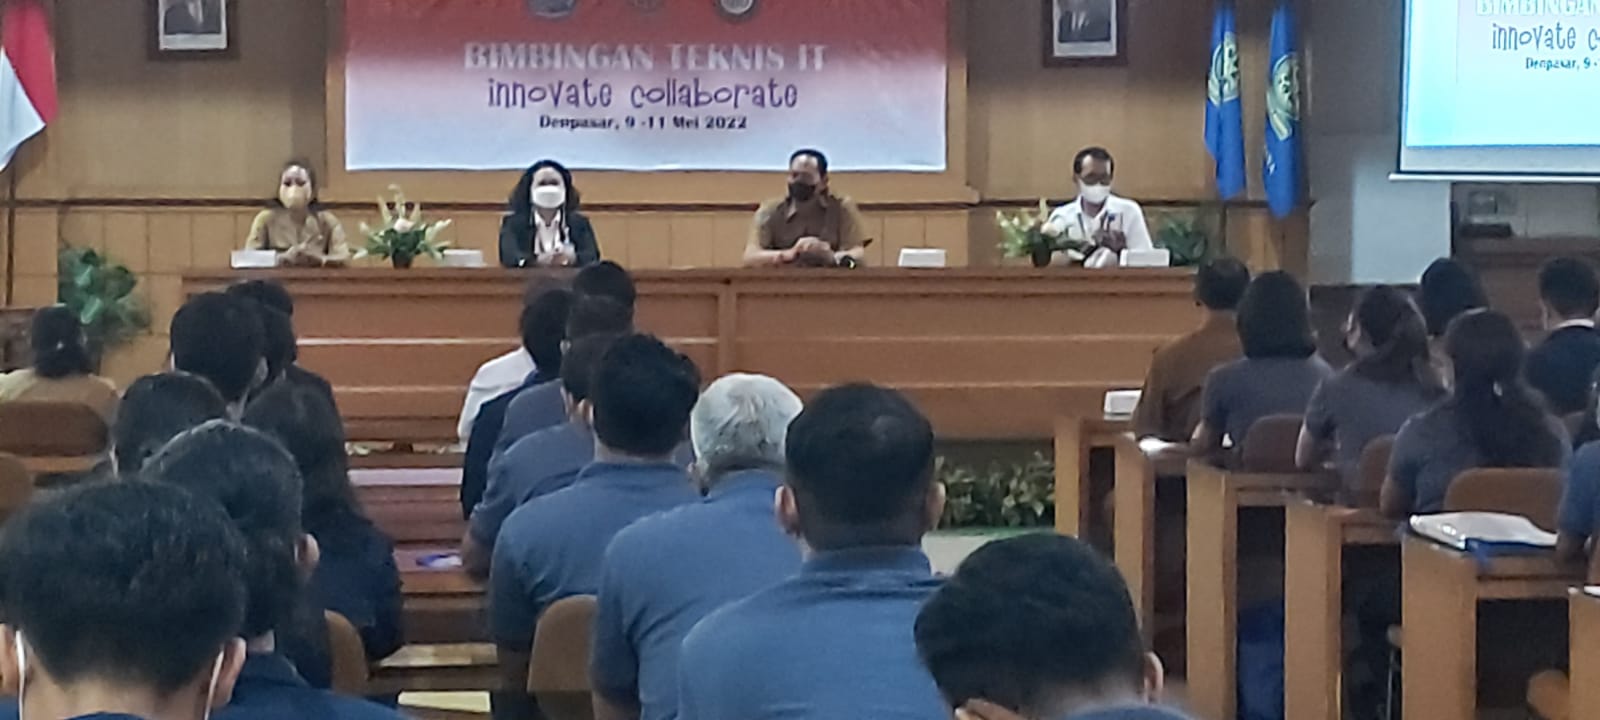 Faculty of Mathematics and Natural Sciences, Udayana University and the Denpasar City Cooperatives and MSMEs Department held IT Technology Bimtek